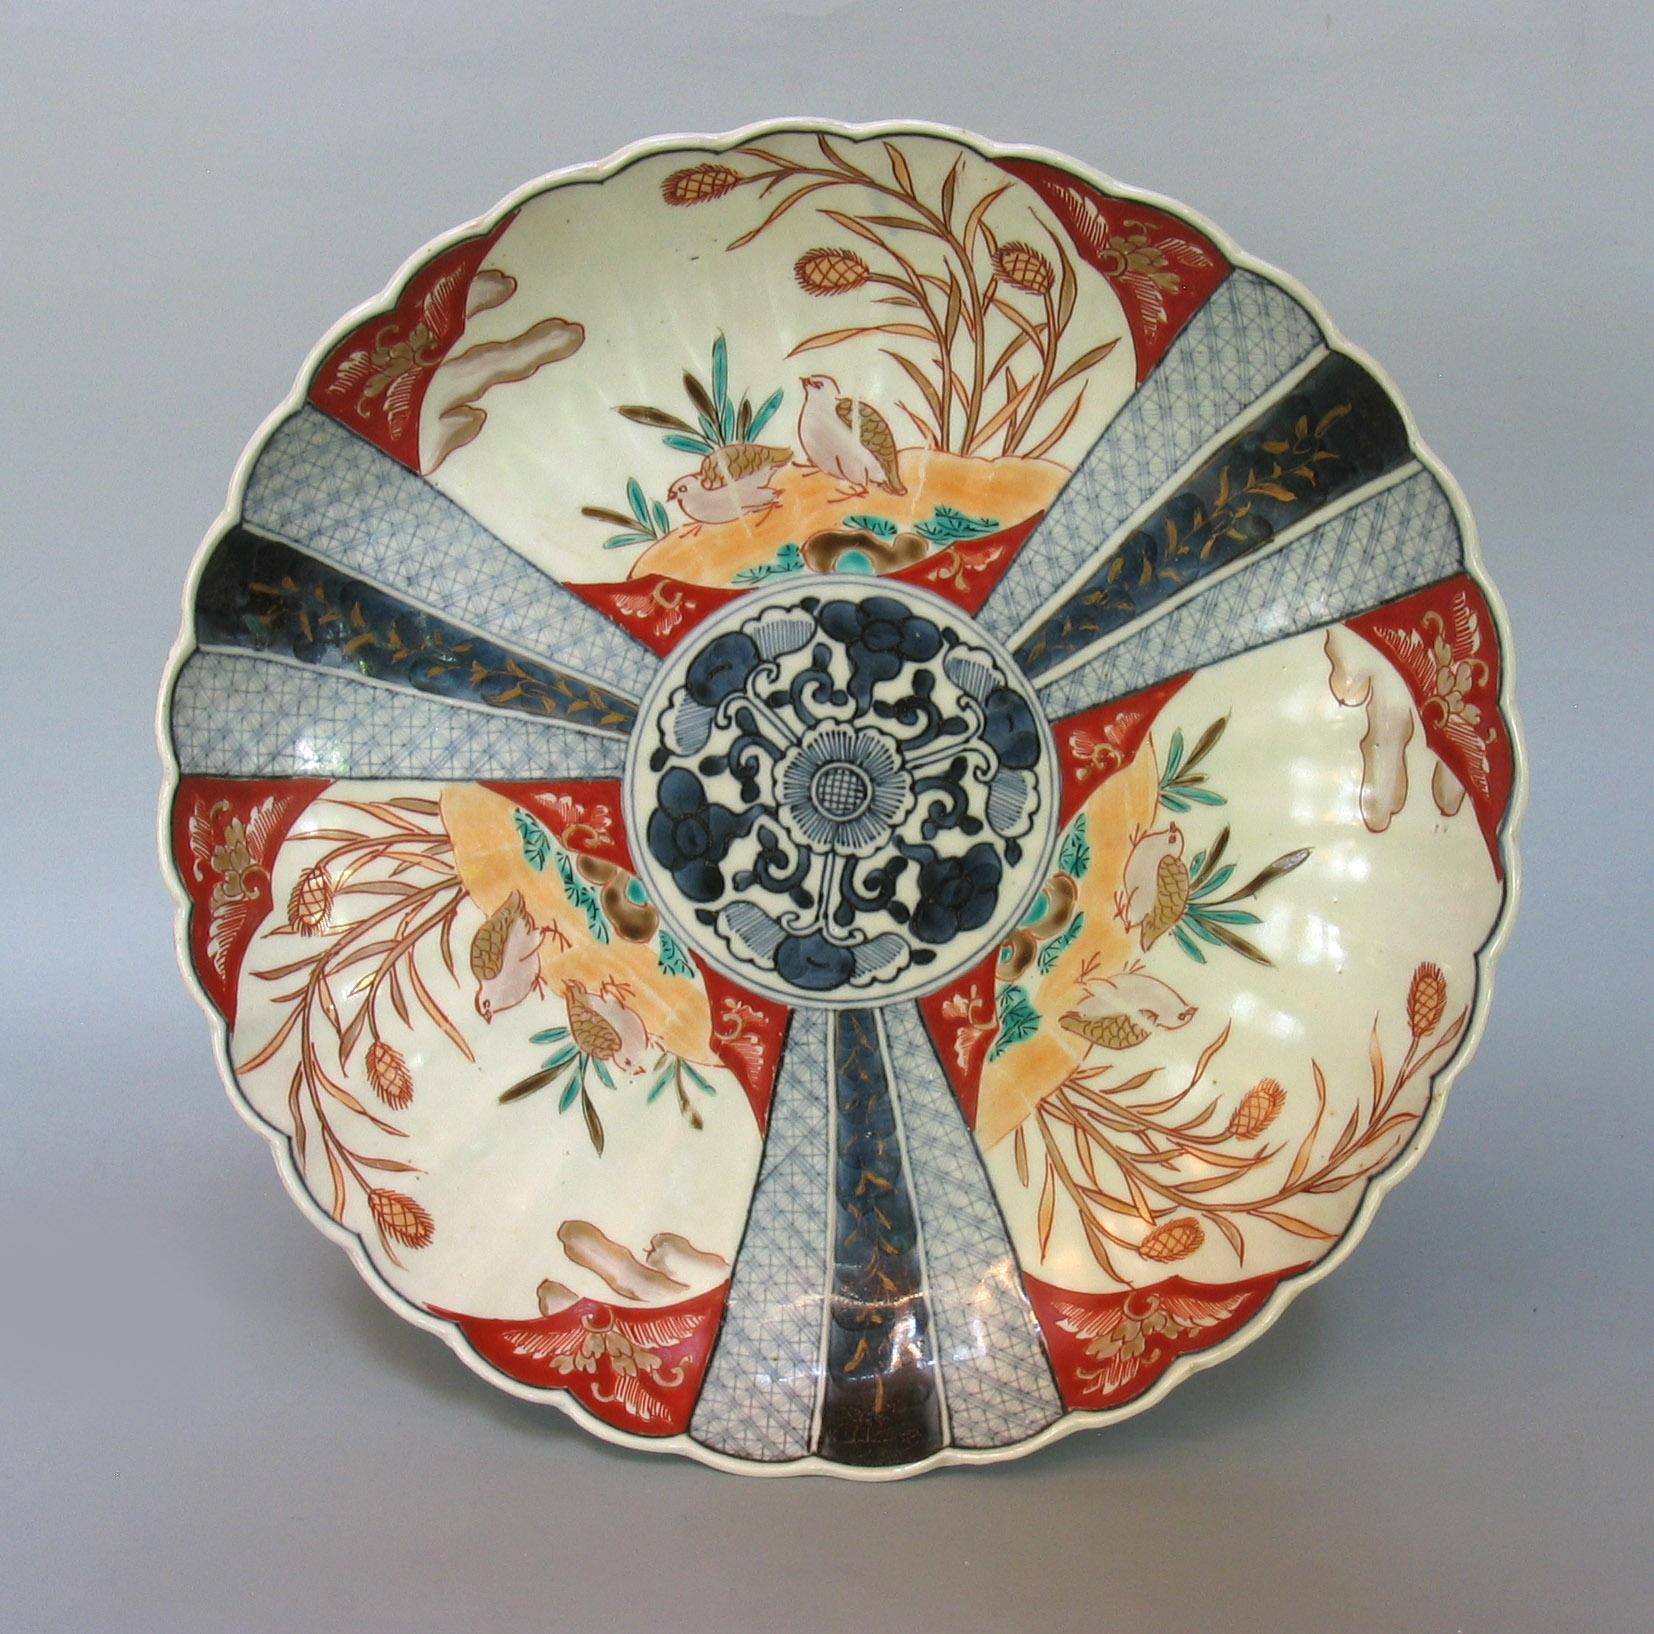 Hand-Crafted Japanese Porcelain Imari Charger 19th Century